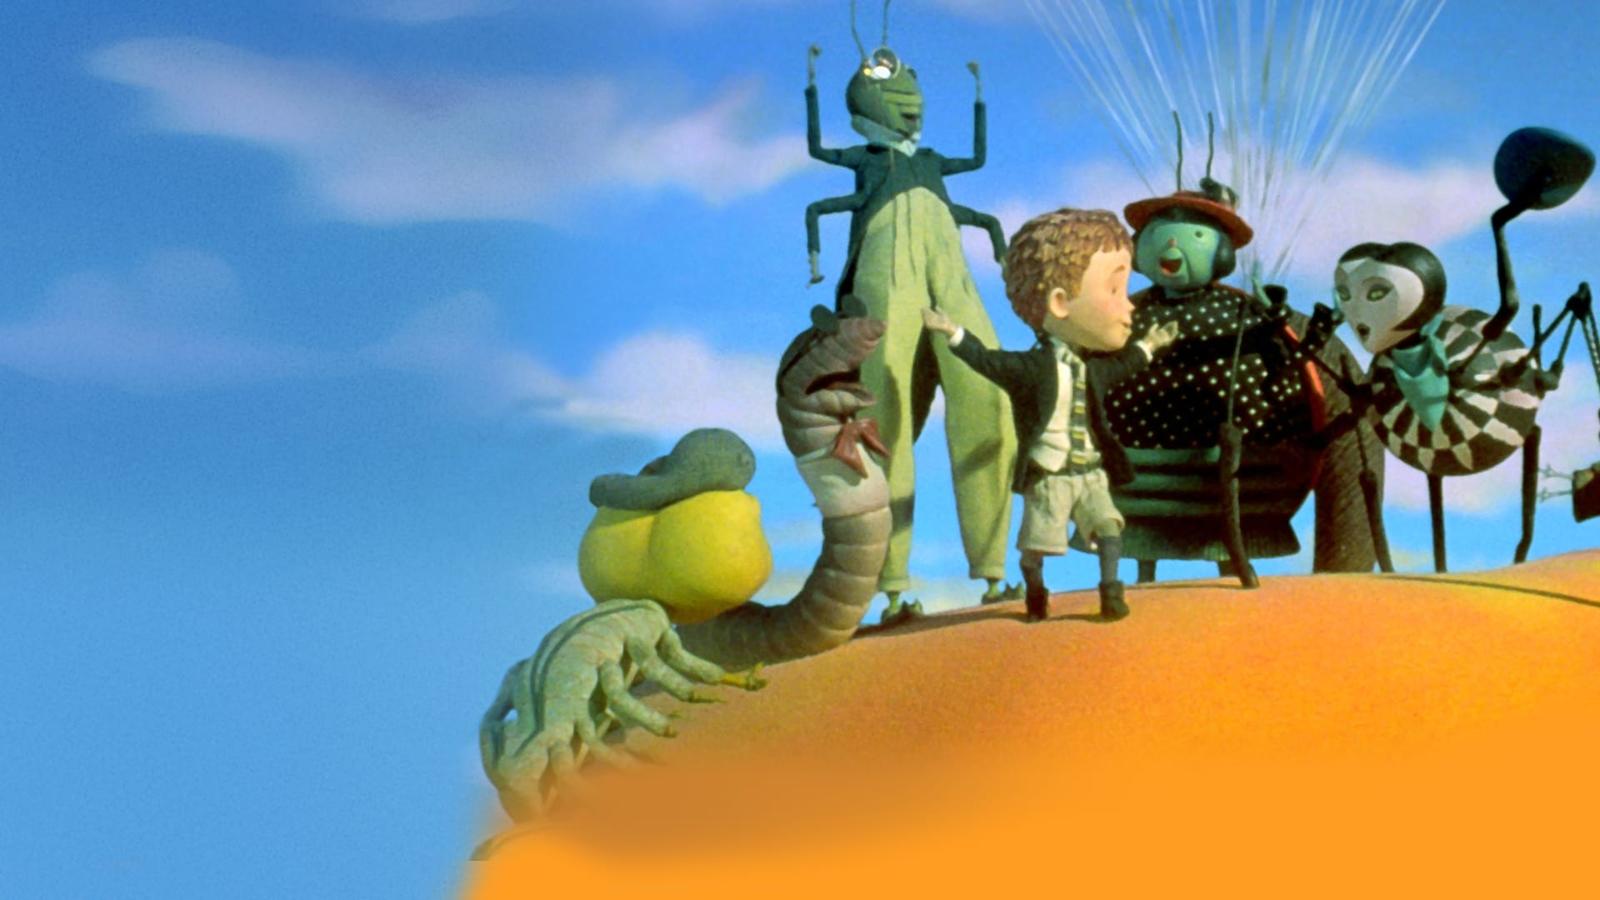 Male Animated Archetype Quiz James and the Giant Peach